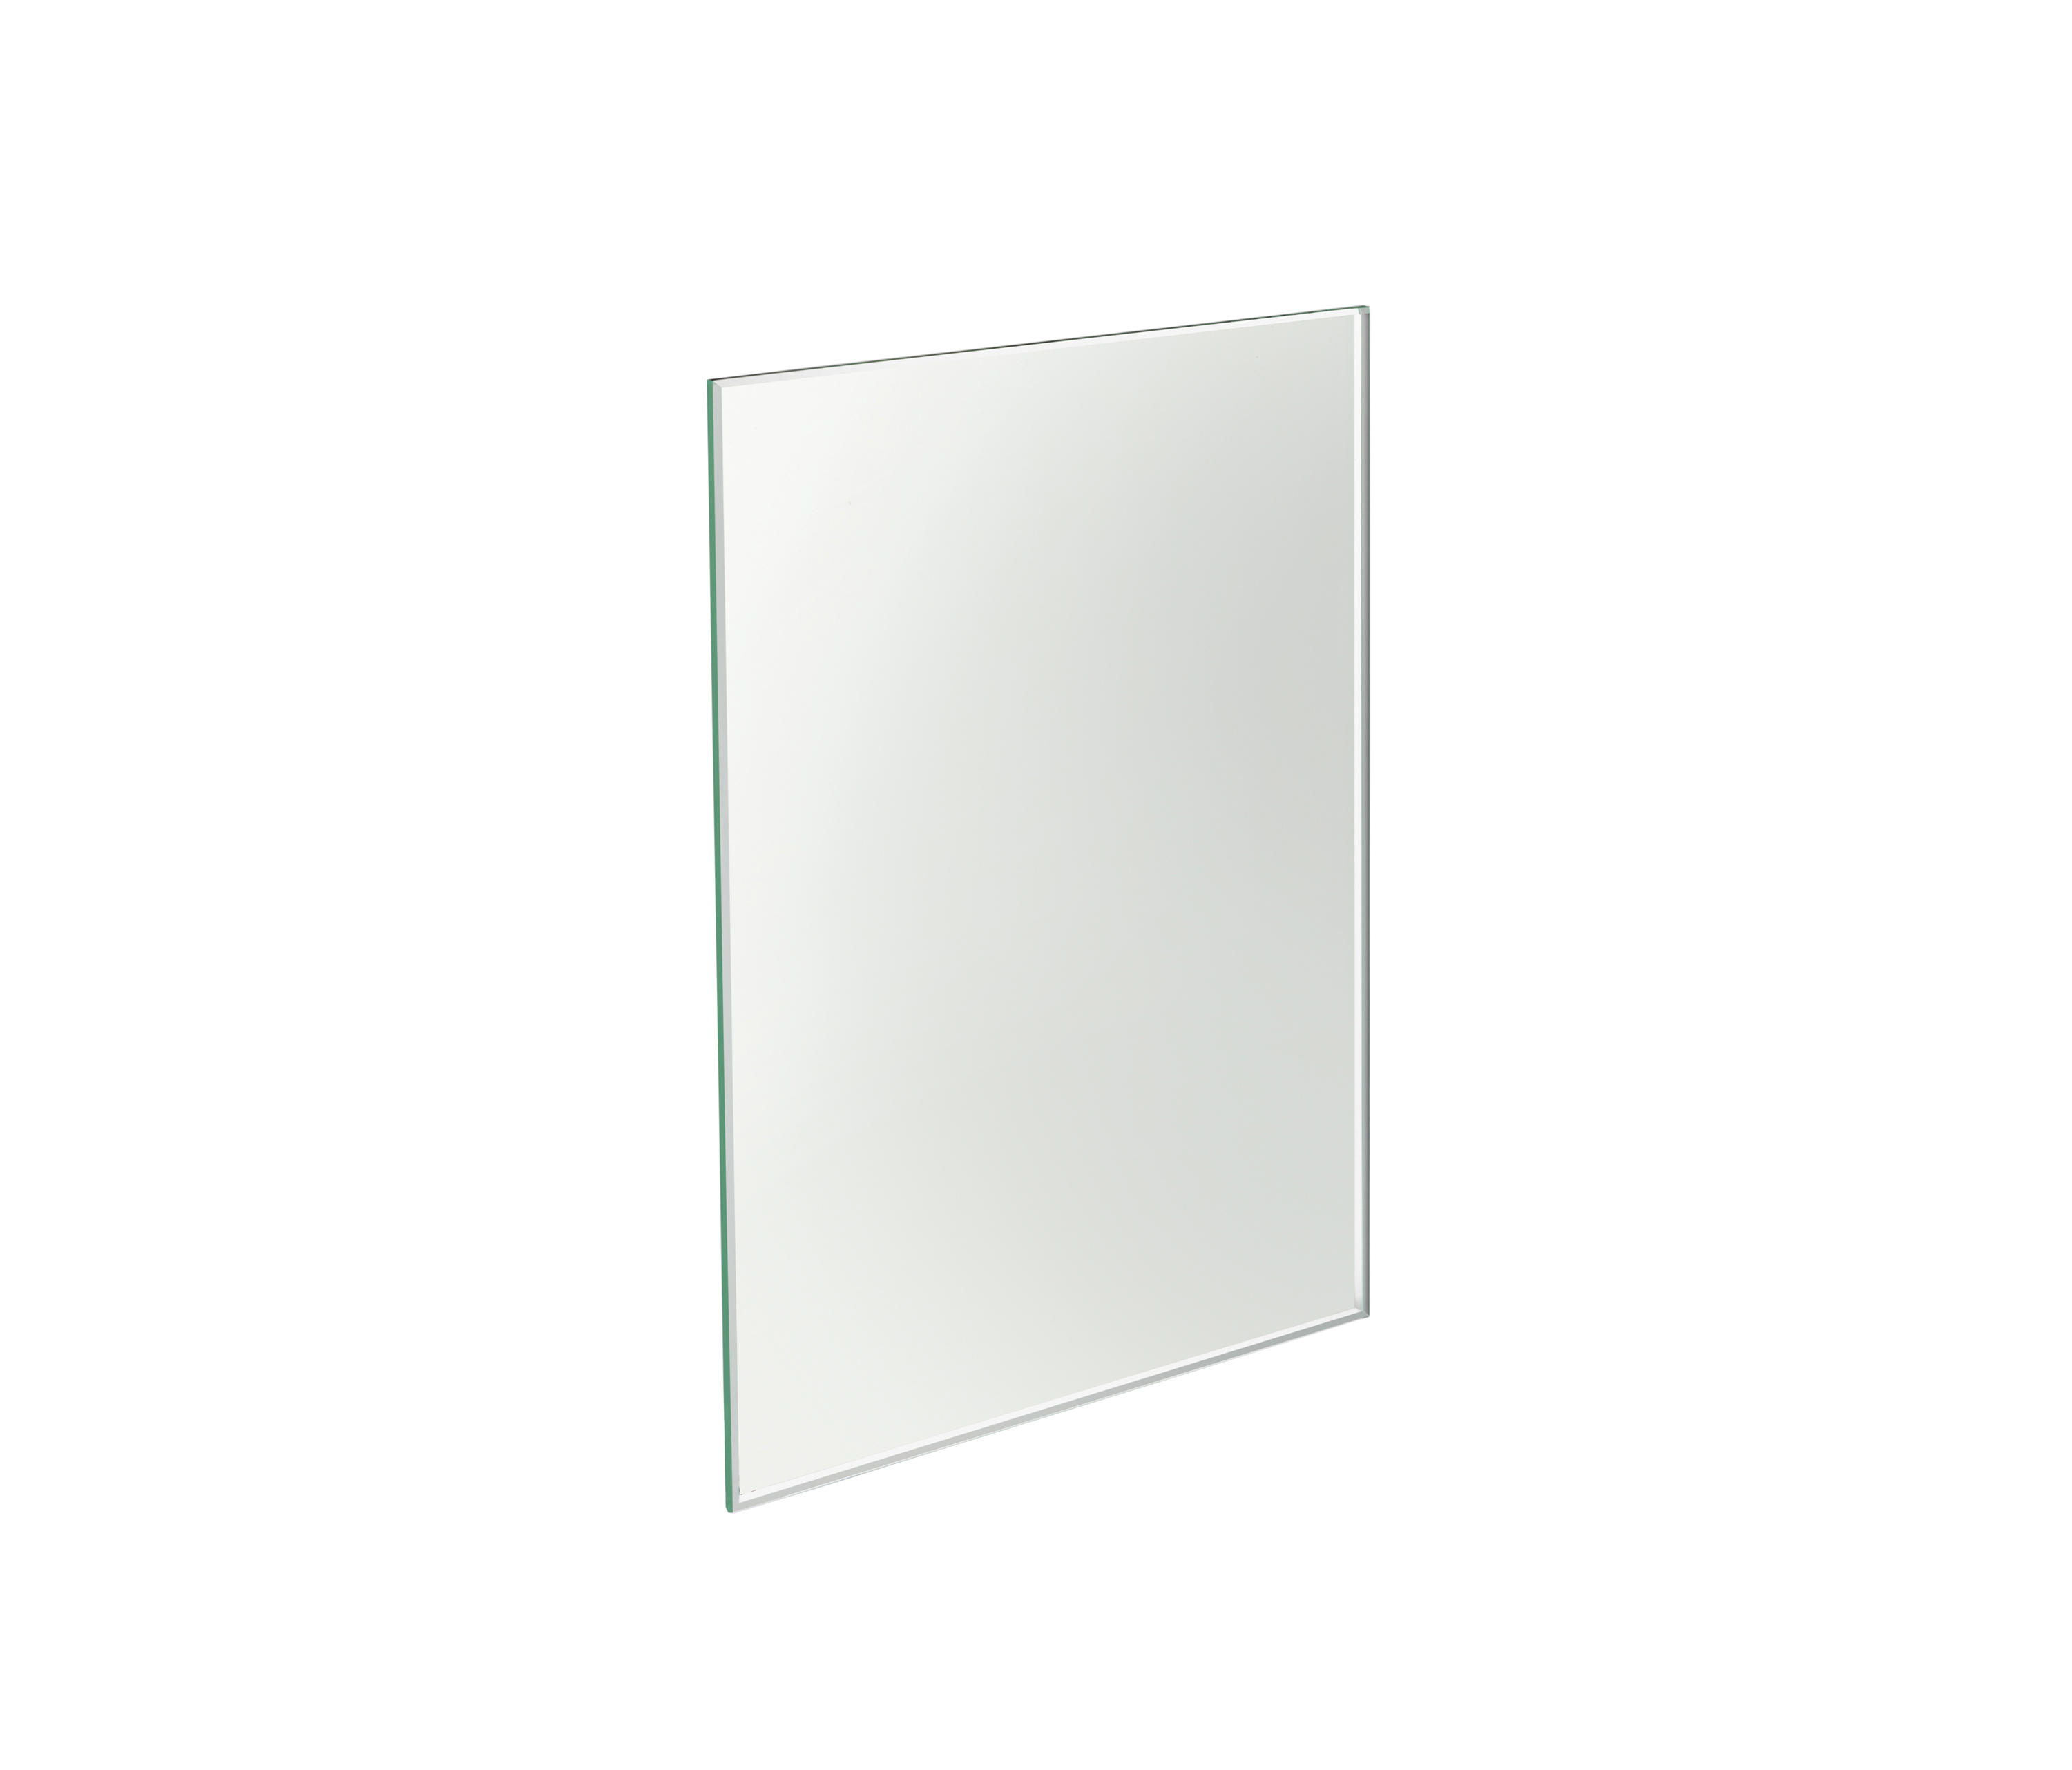 MIRAGE MIRROR - Mirrors from Pomd’Or | Architonic